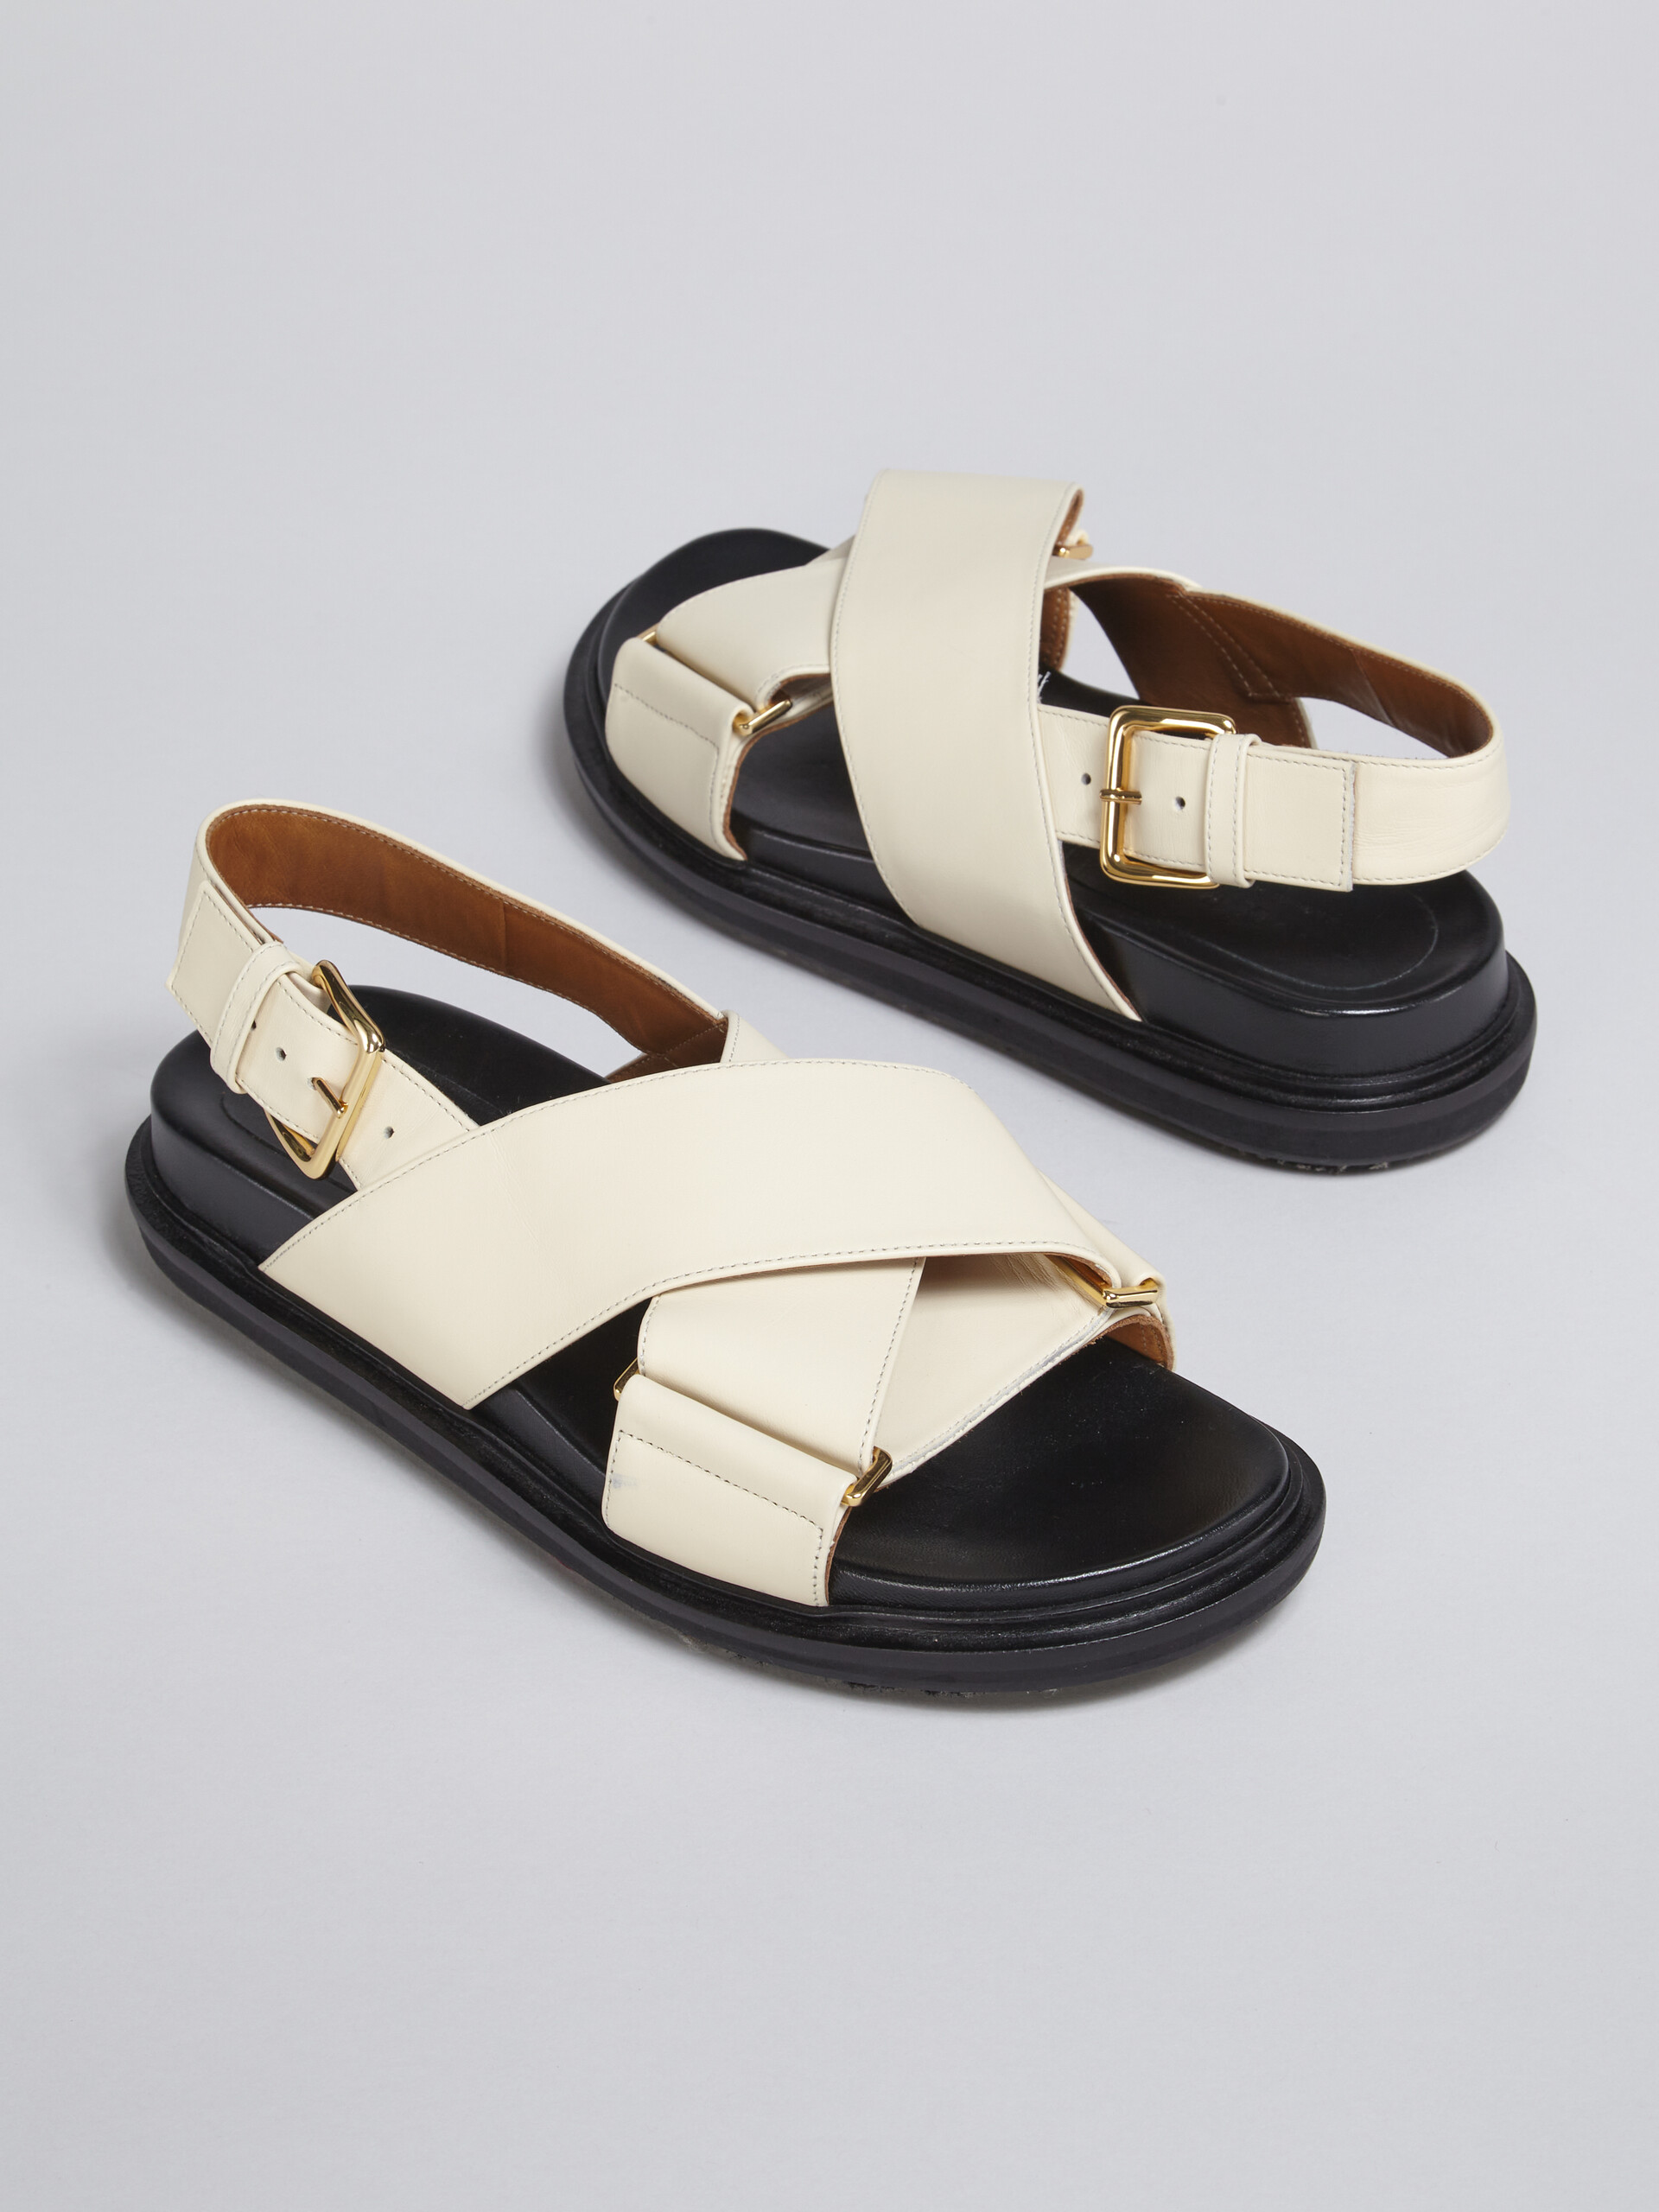 White smooth calf leather fussbett - Sandals - Image 5